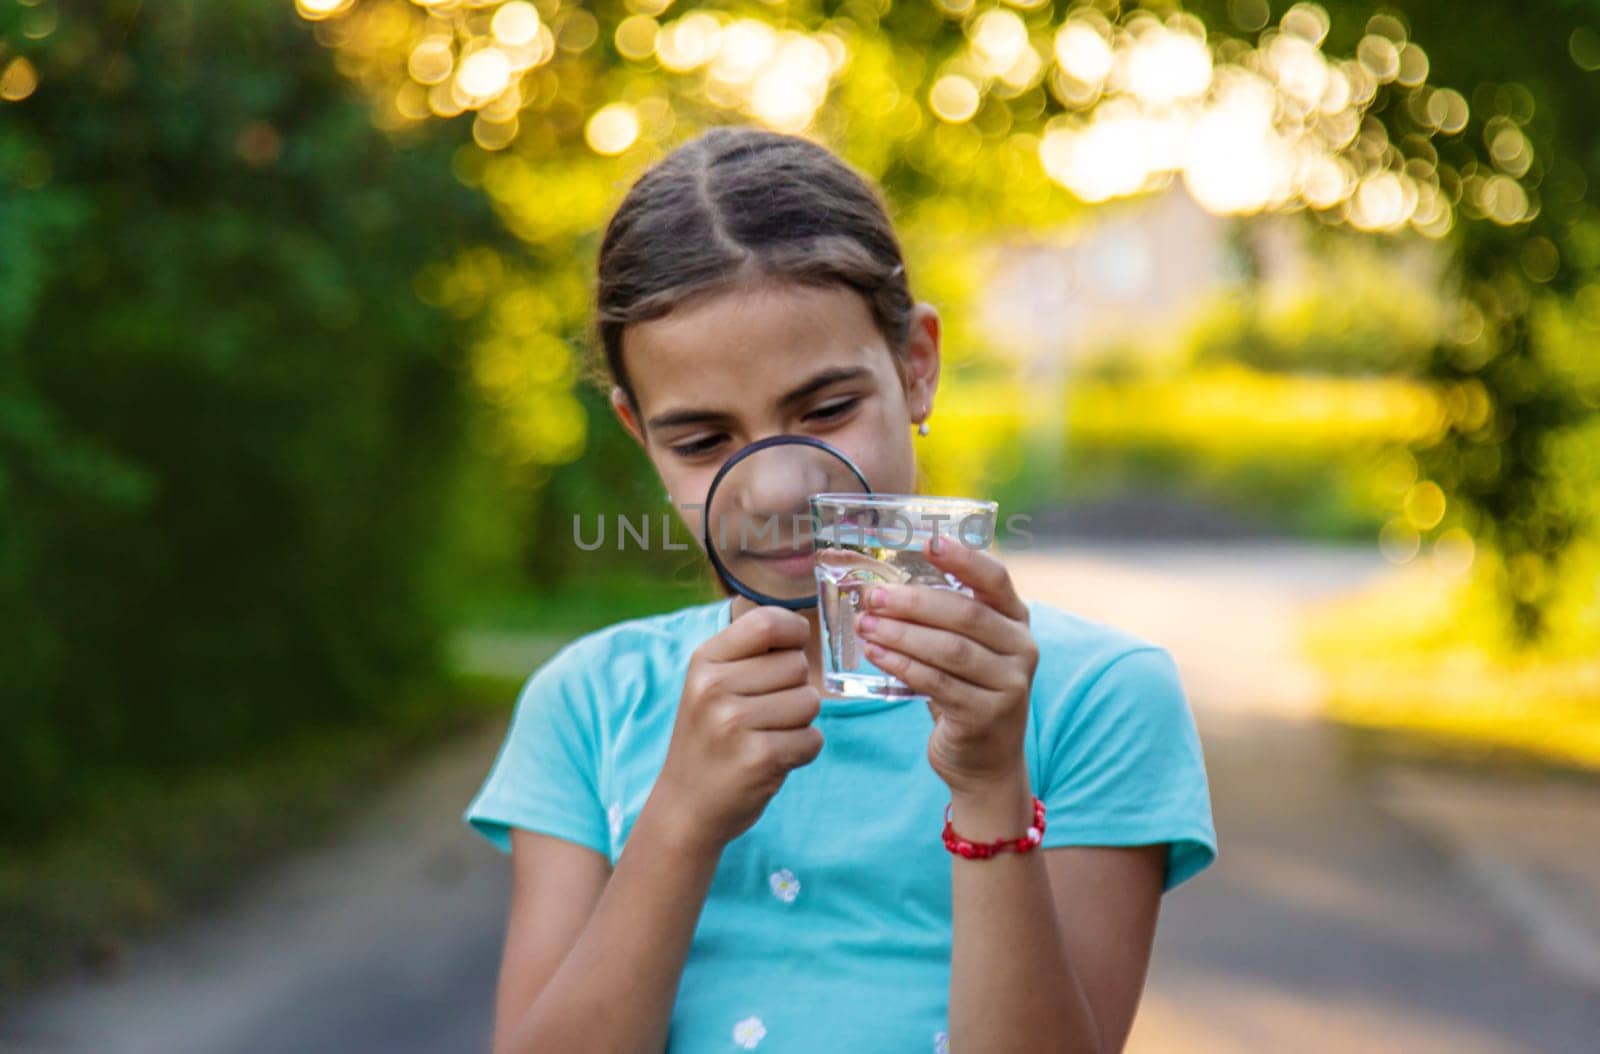 A child looks into a glass of water with a magnifying glass. Selective focus. Drink.